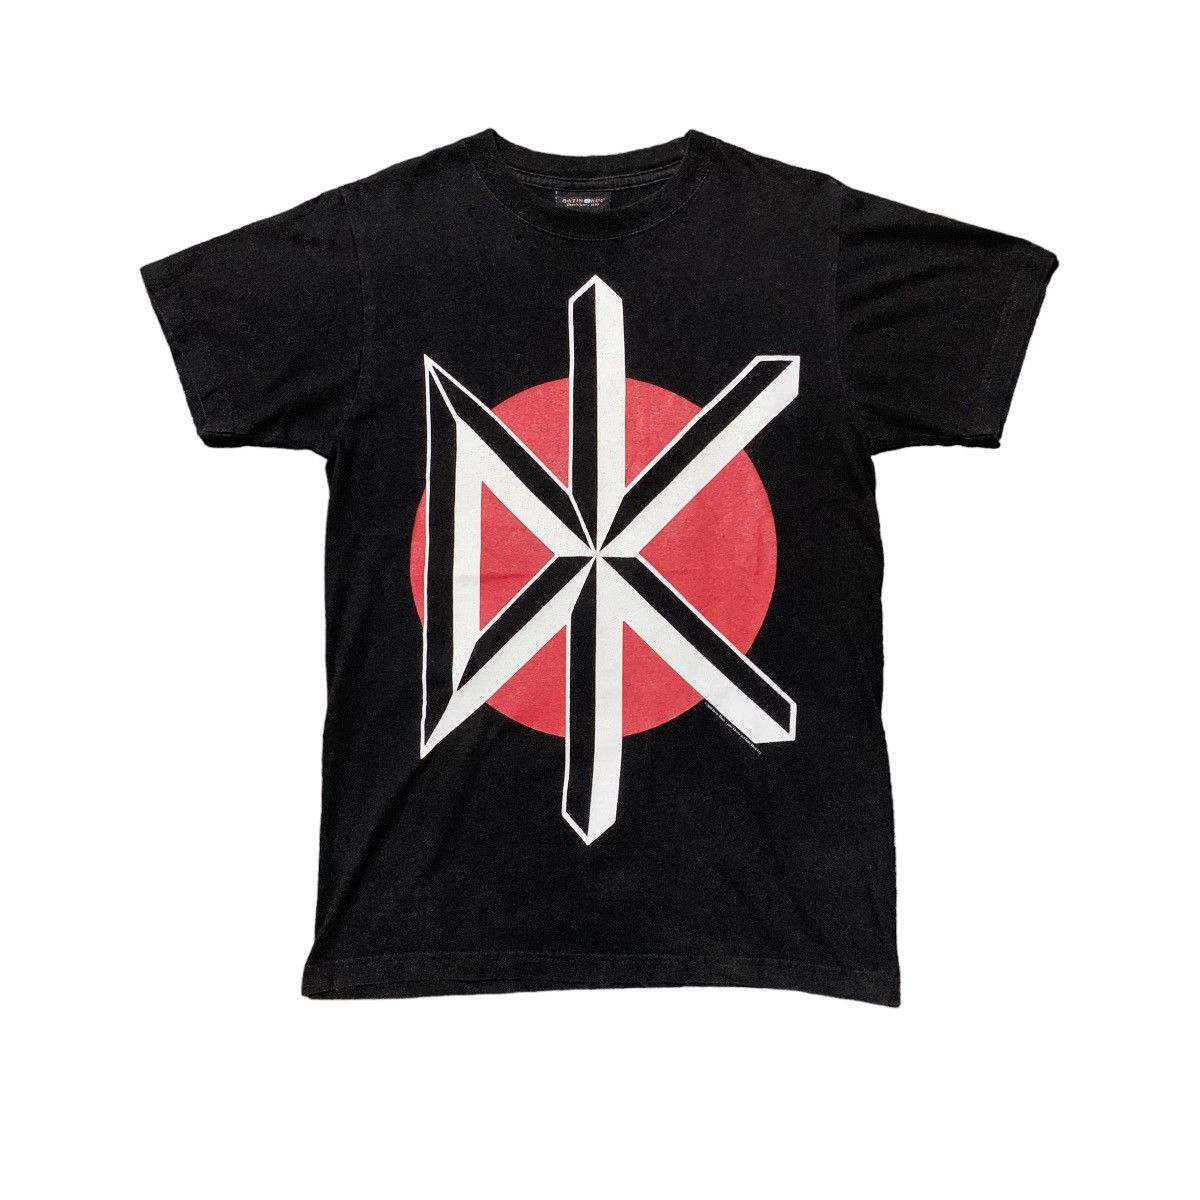 Dead Kennedys ✨Y2K “ADULT” DEAD KENNEDYS PUNK ROCK BAND TEES Size US S / EU 44-46 / 1 - 1 Preview